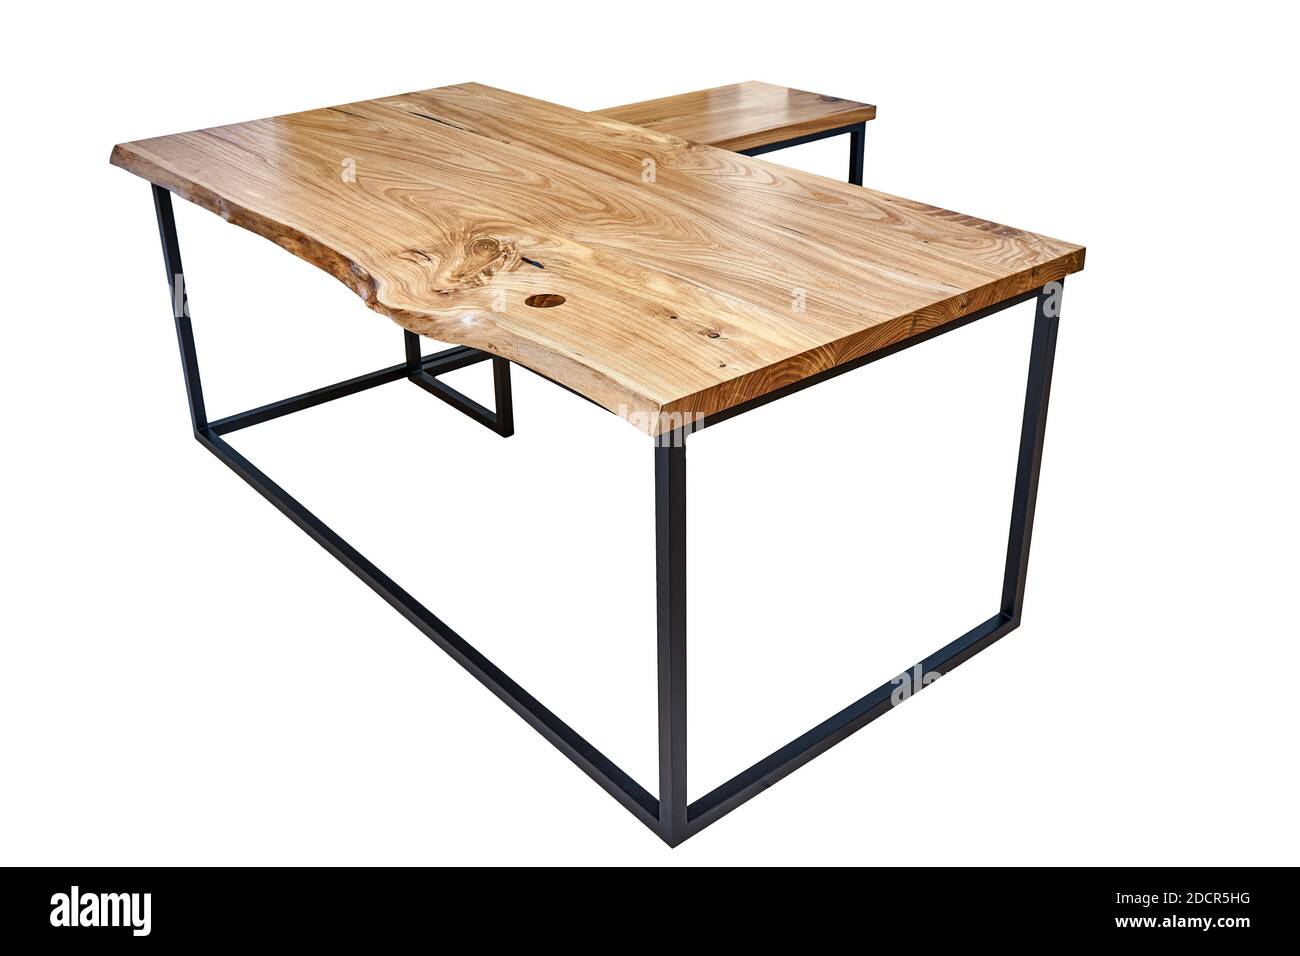 Live edge elm gaming desk countertop with metal base on white background Stock Photo